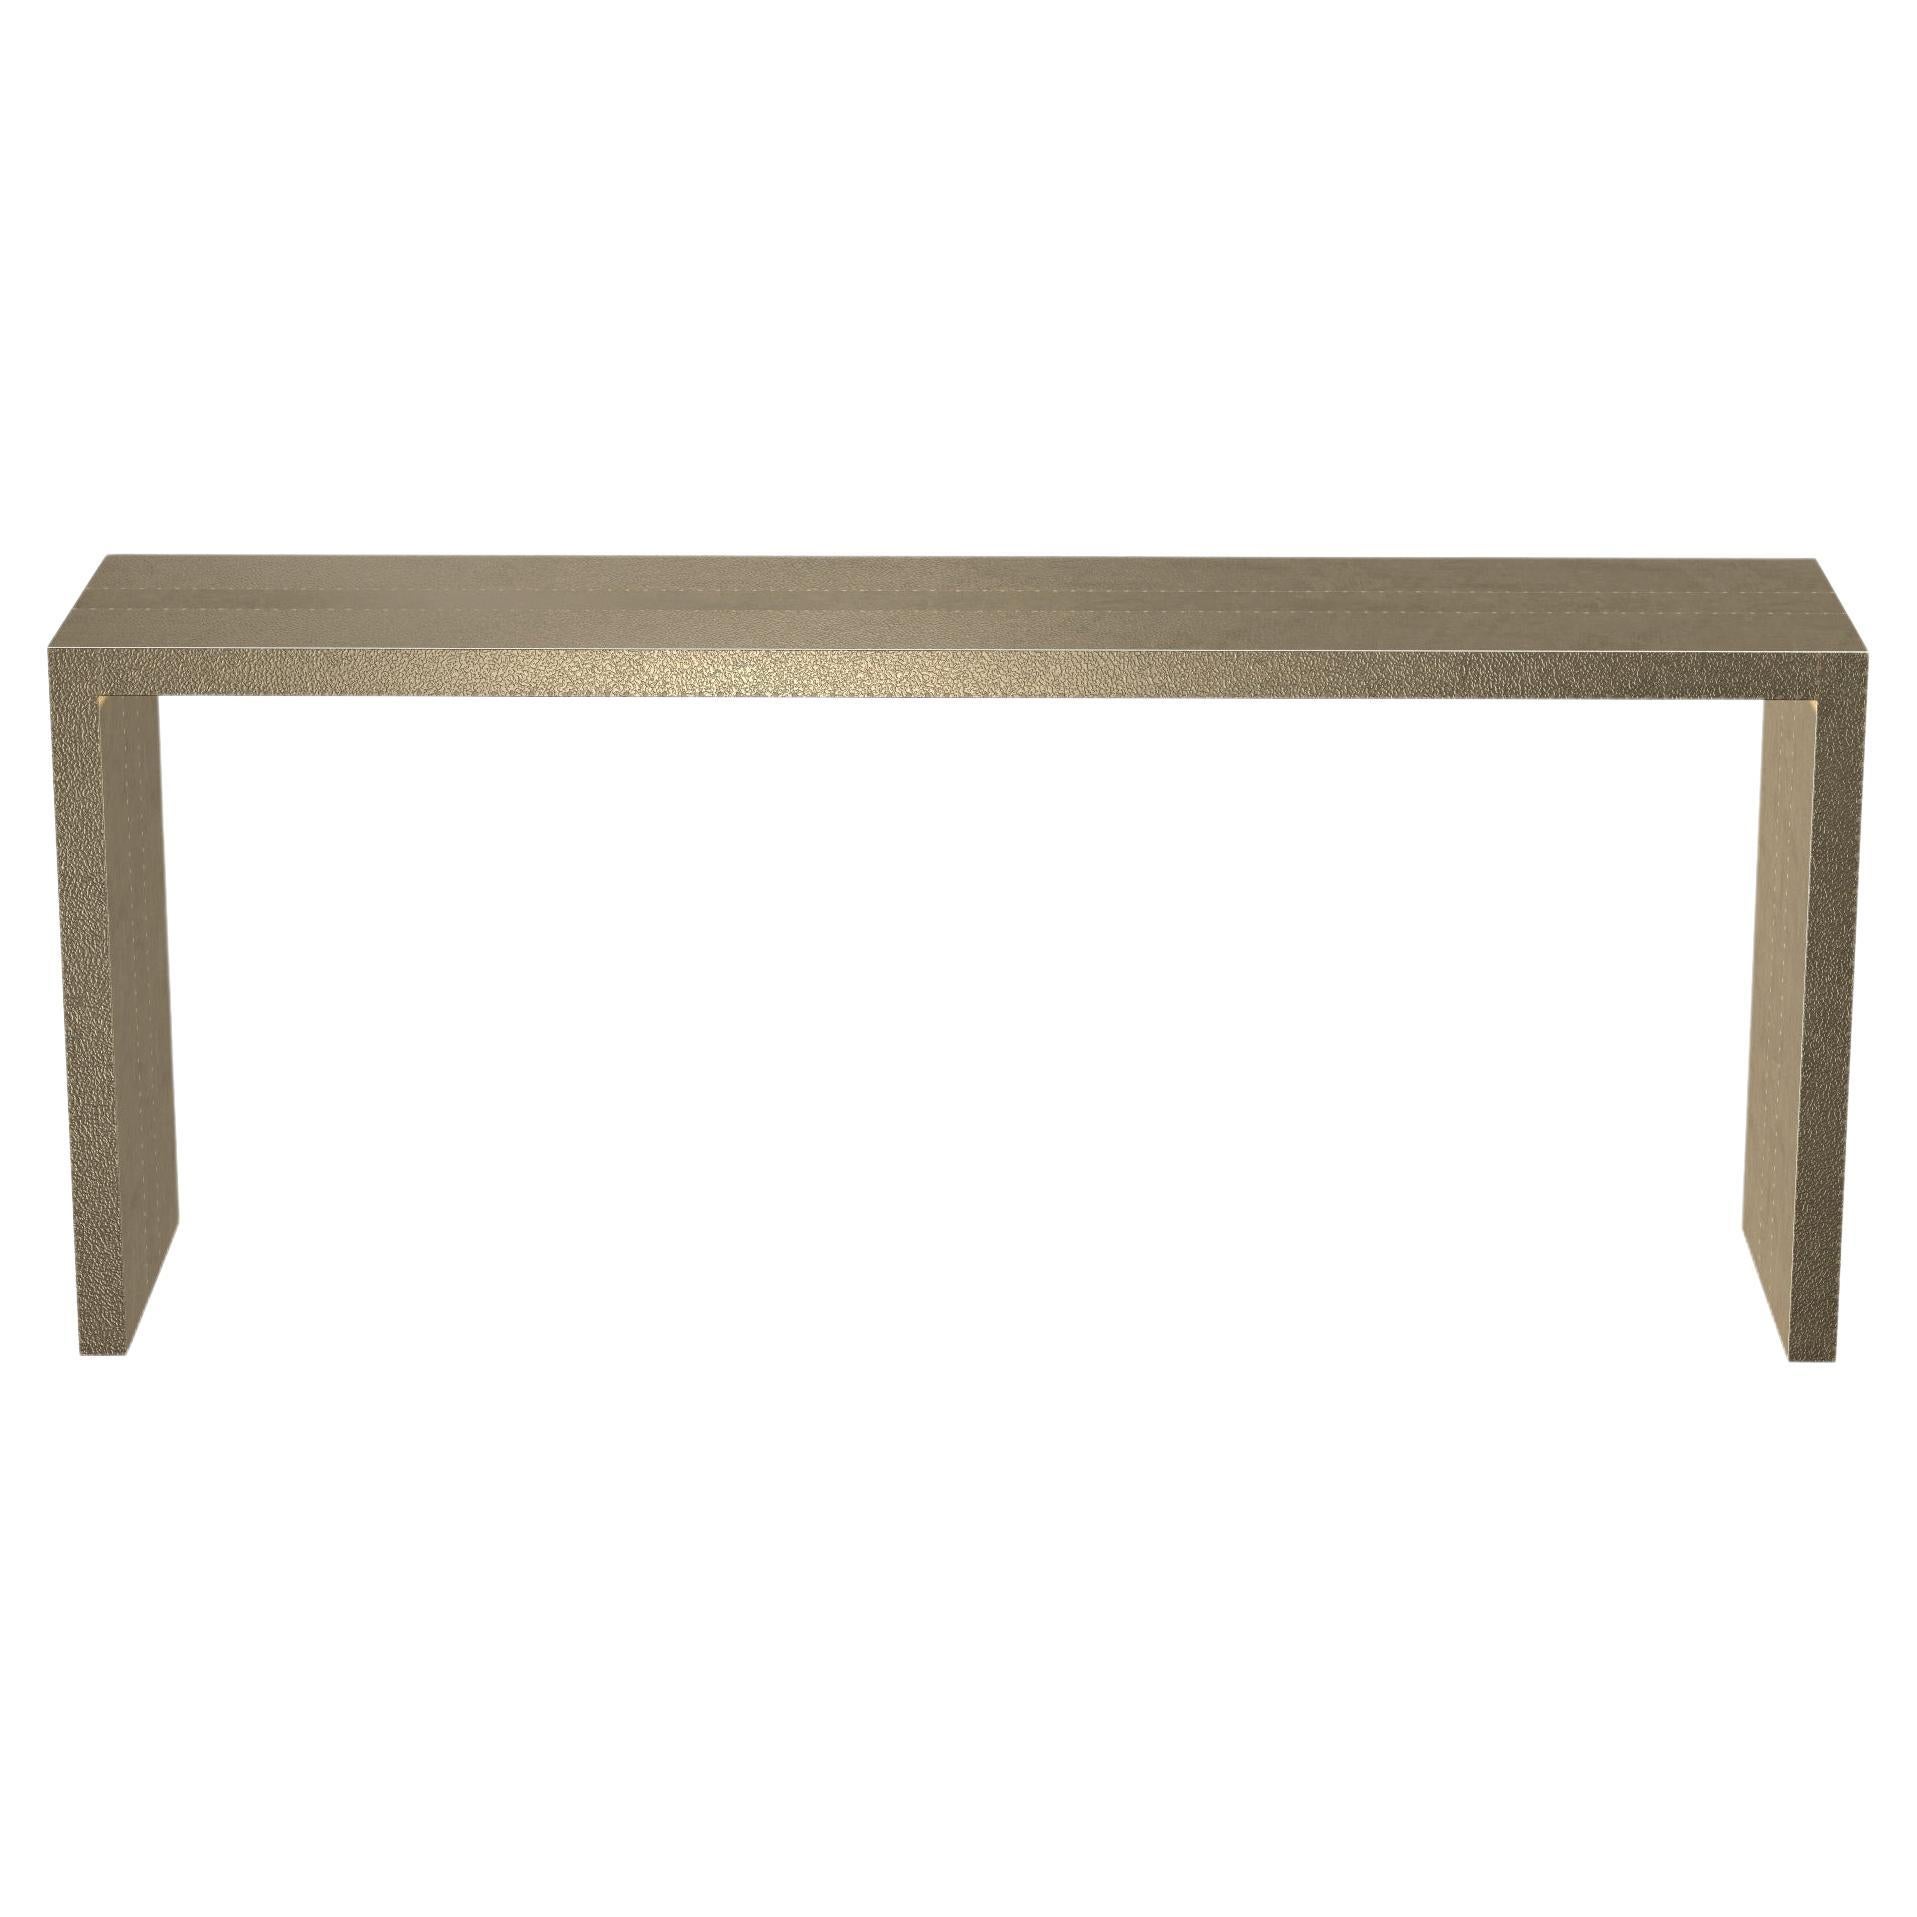 Art Deco Game Console Tables in Fine Hammered Brass by Alison Spear For Sale